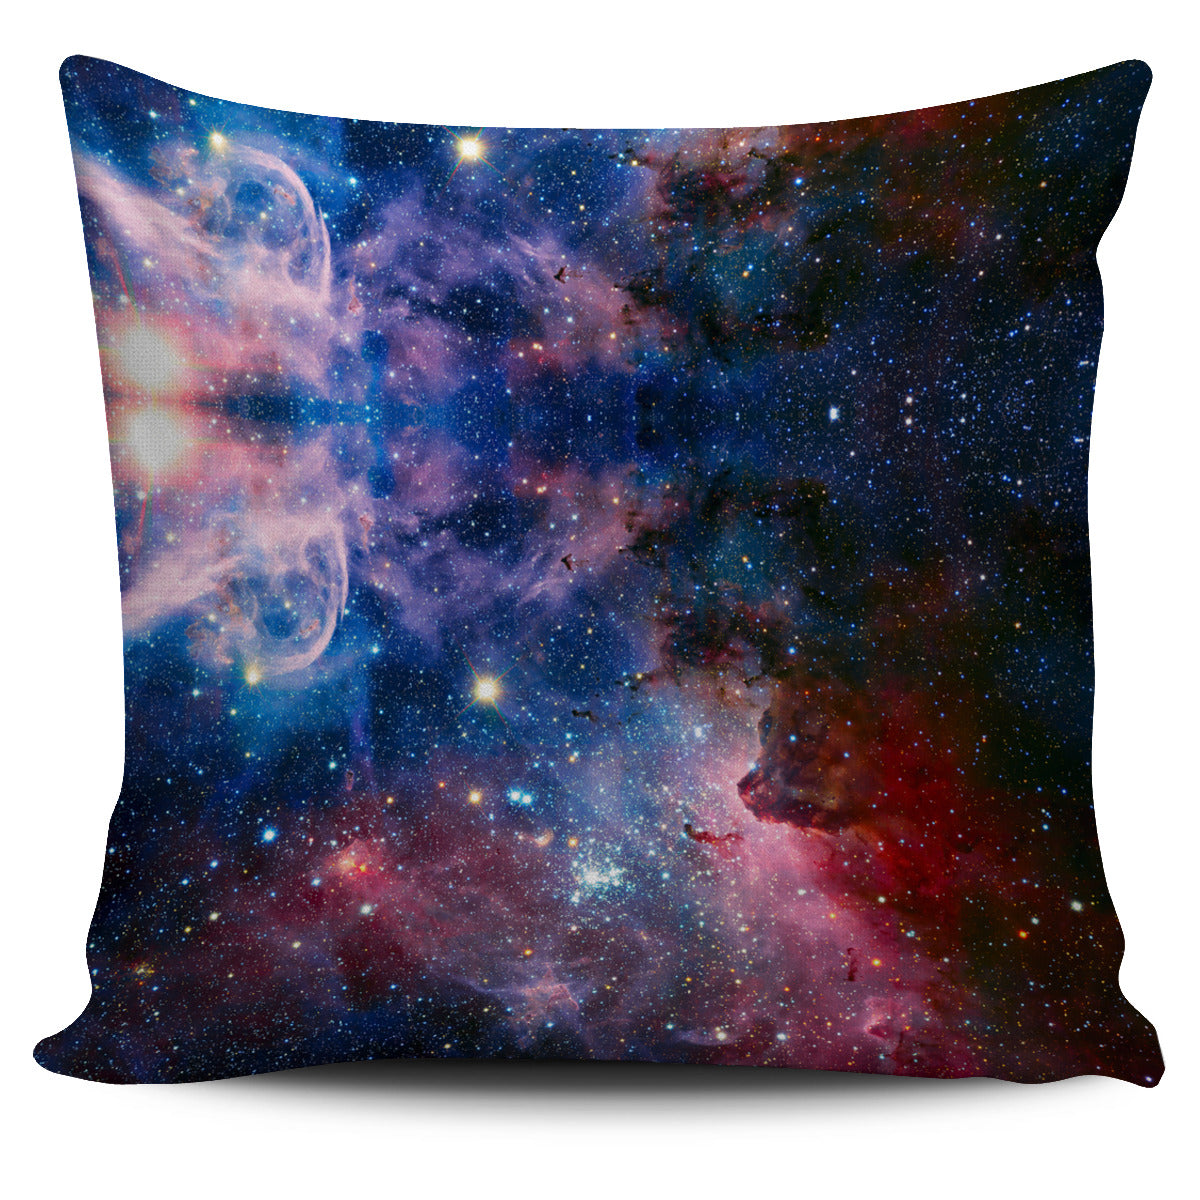 Galaxy Pillow Cover